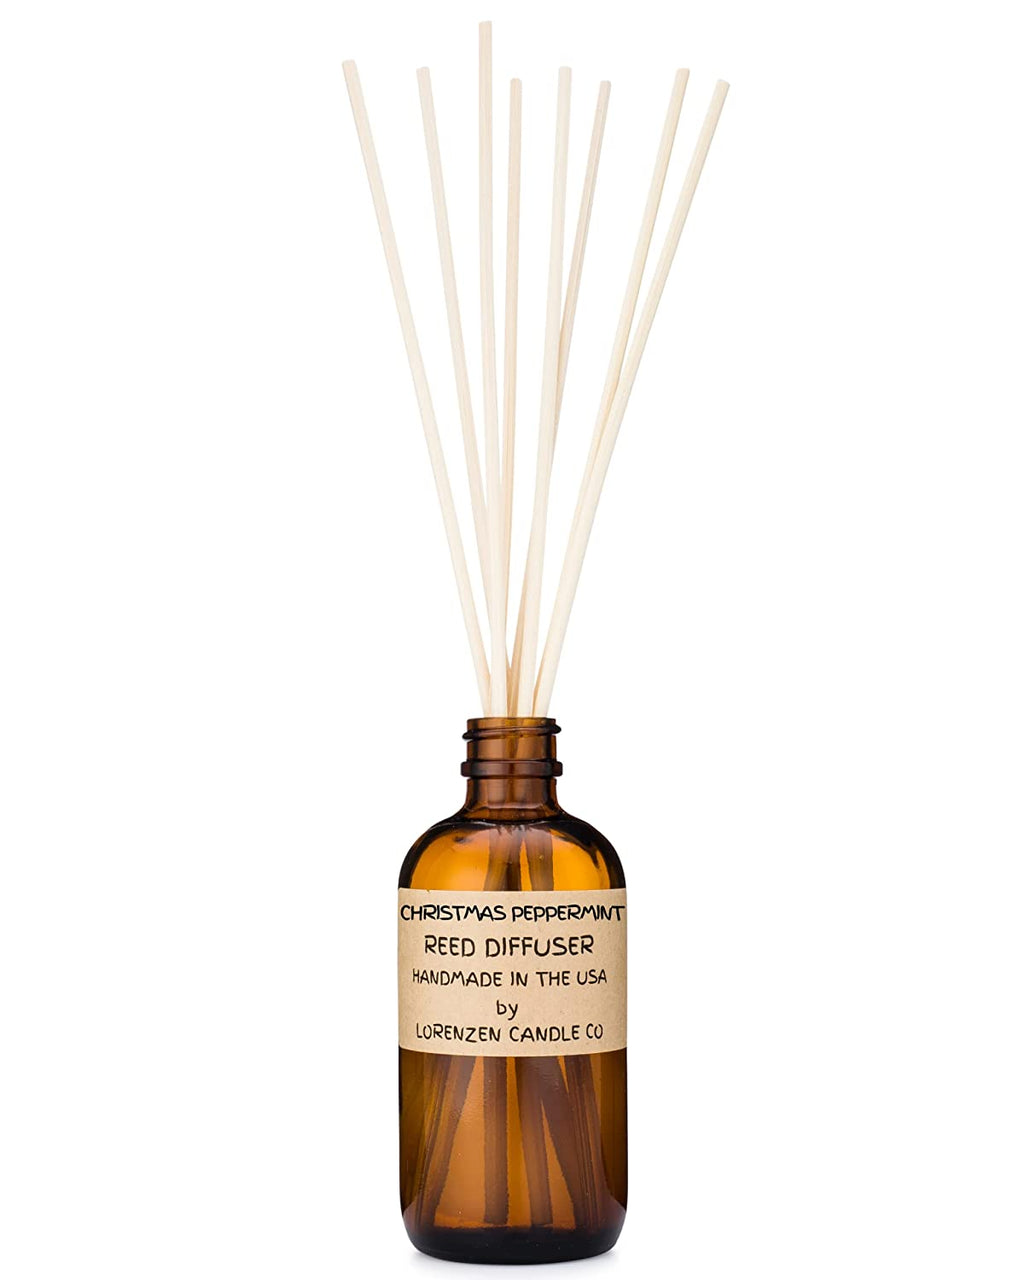 Christmas Peppermint Reed Diffuser Set 3oz | Handmade in the USA by Lorenzen Candle Co